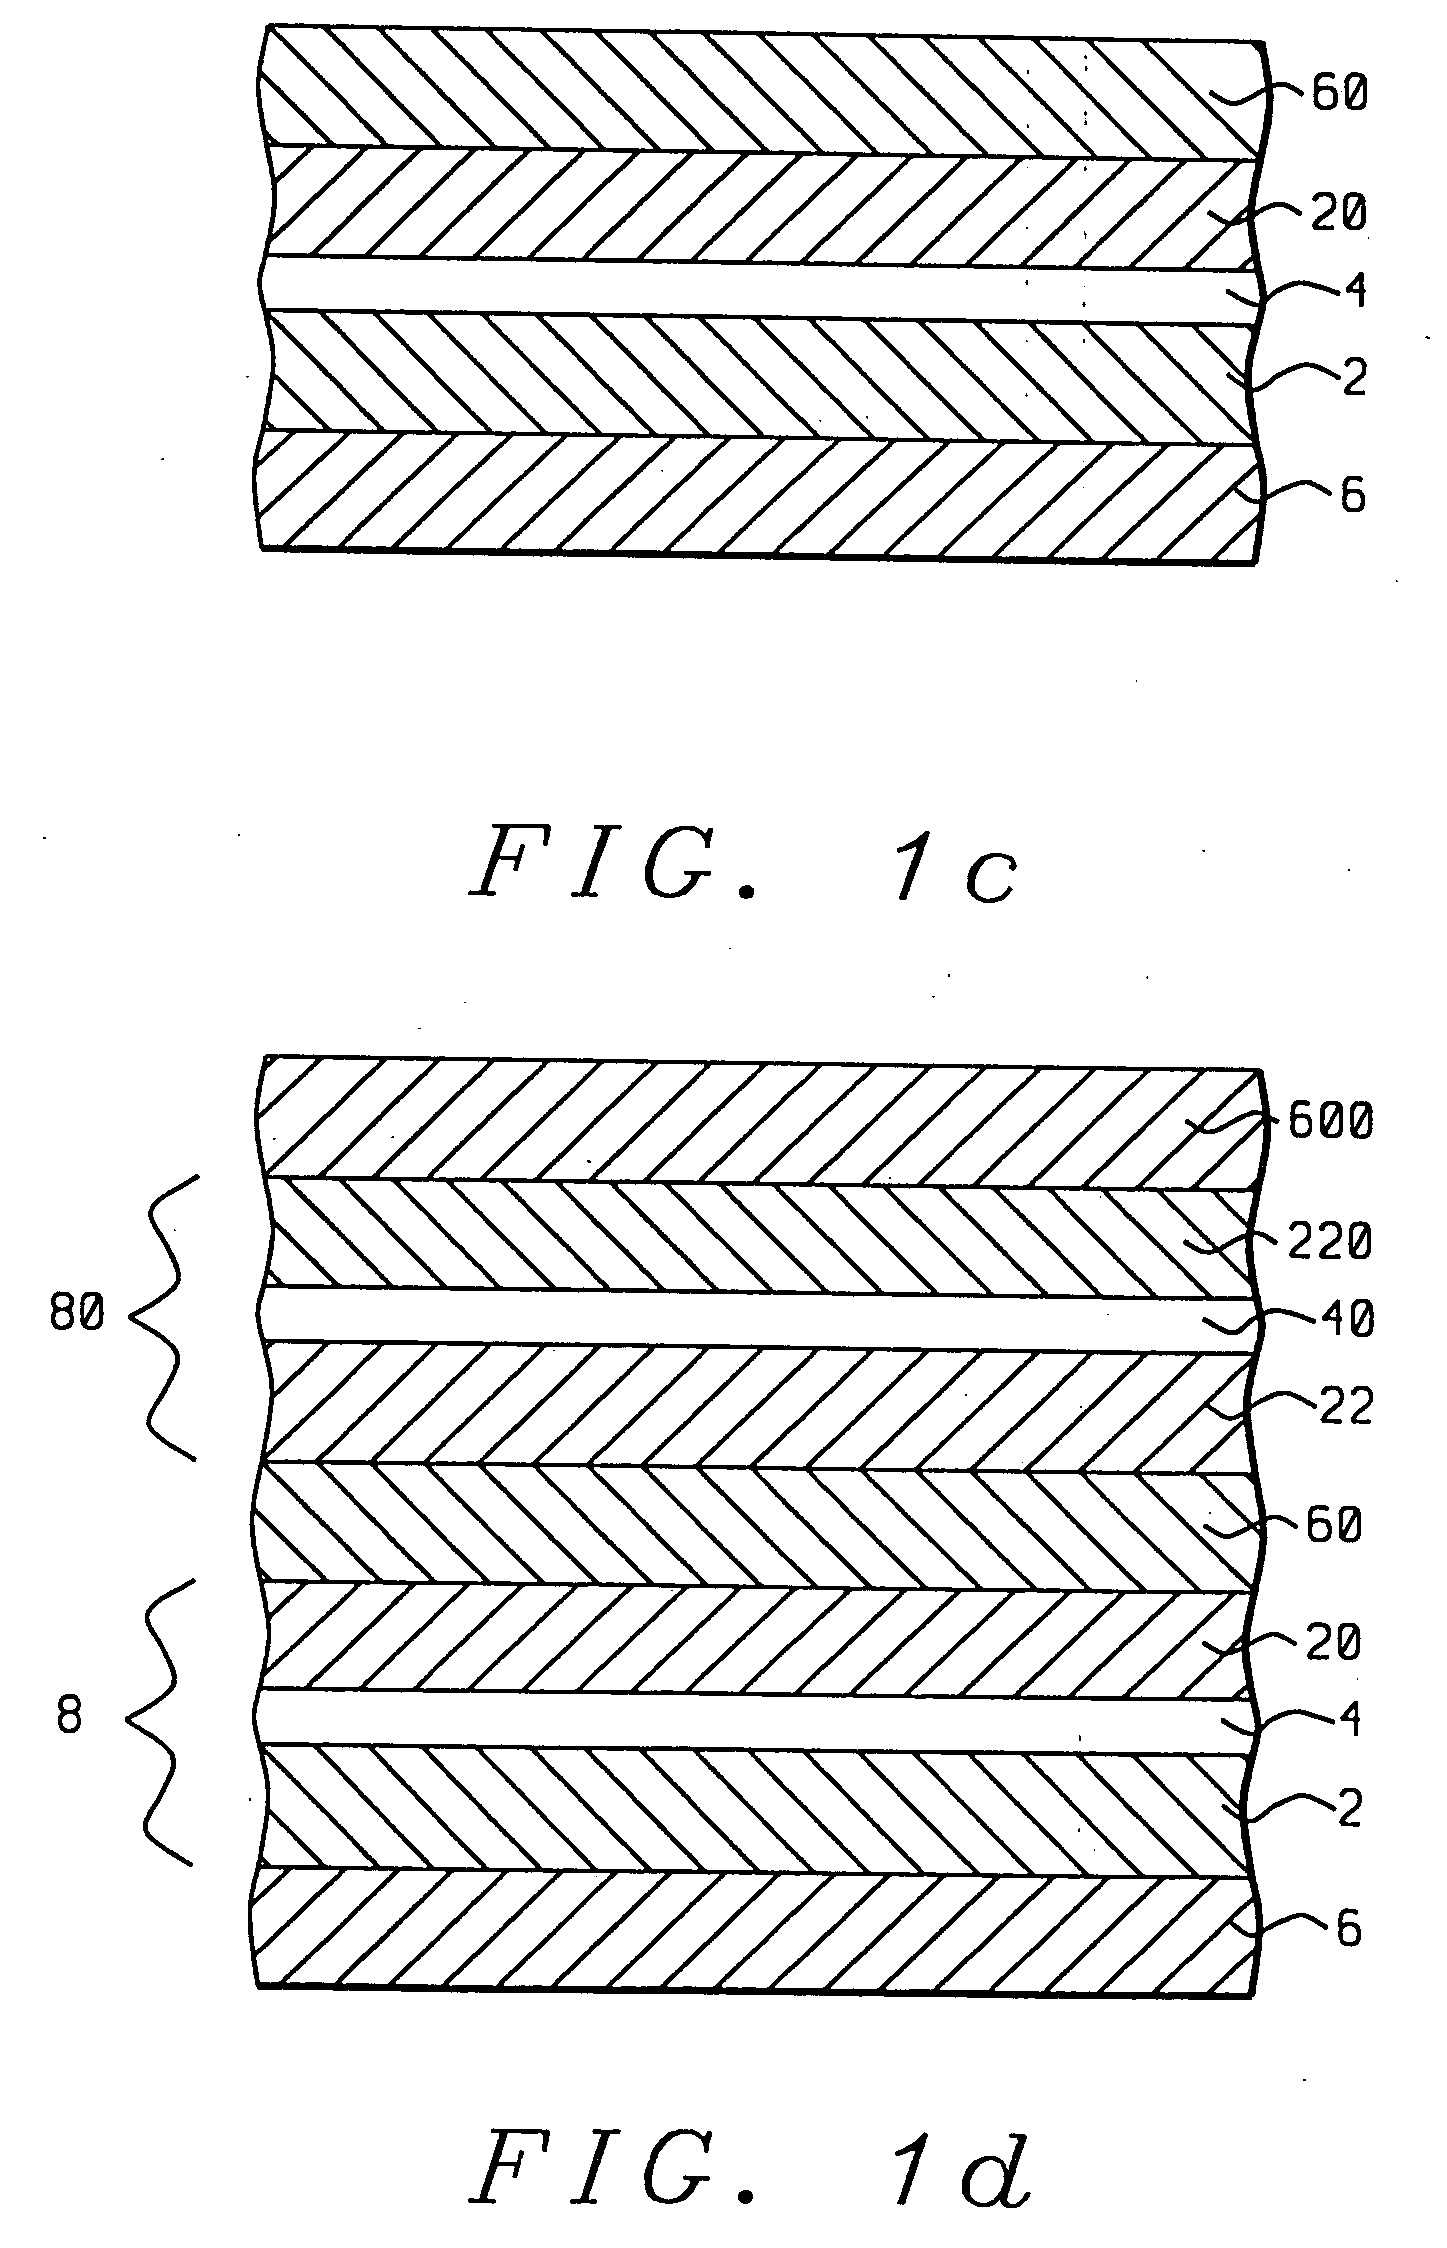 Multilayered structures comprising magnetic nano-oxide layers for current perpendicular to plane GMR heads